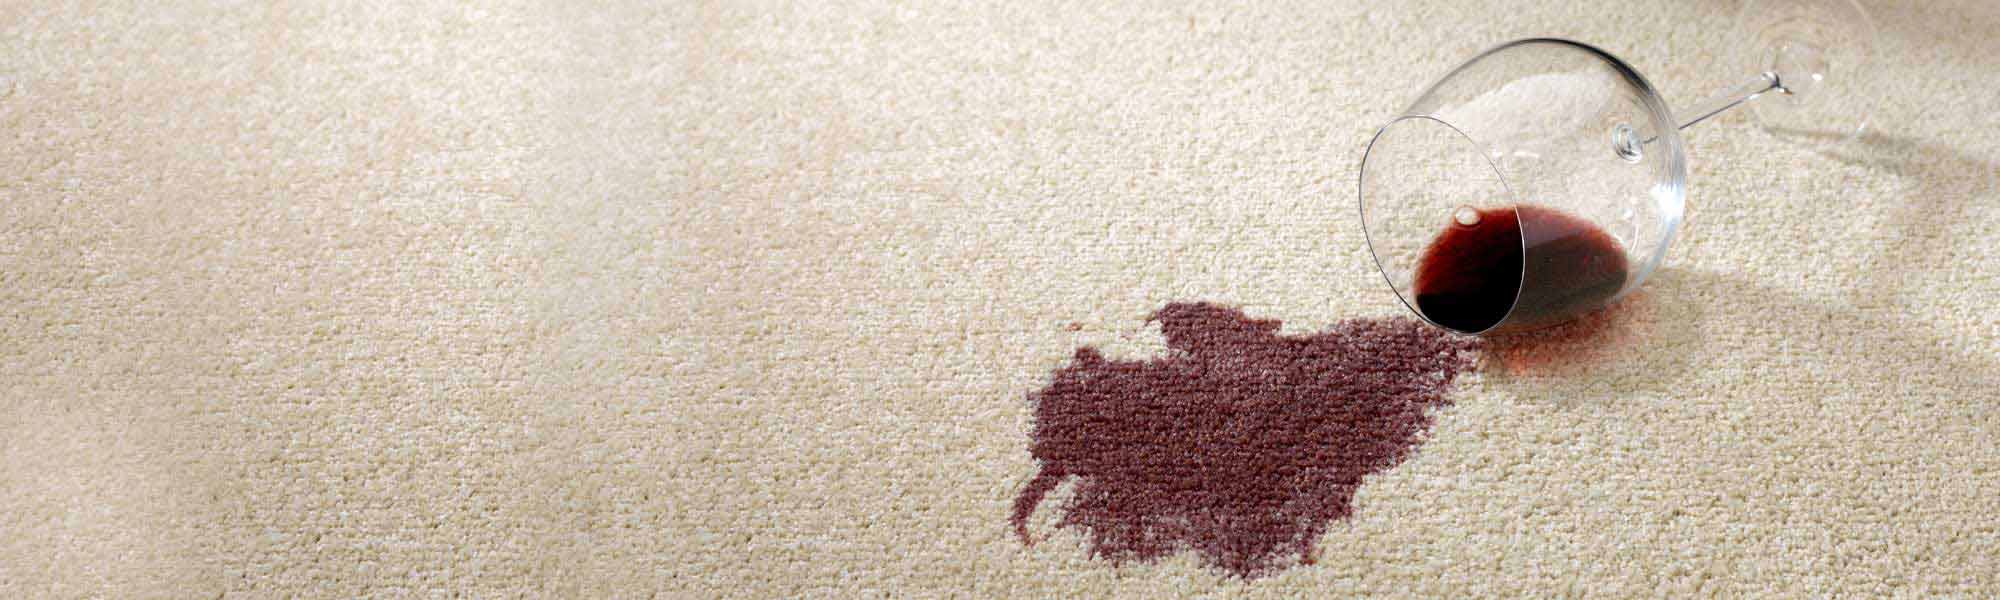 Professional Stain Removal Service by Chem-Dry of Lodi